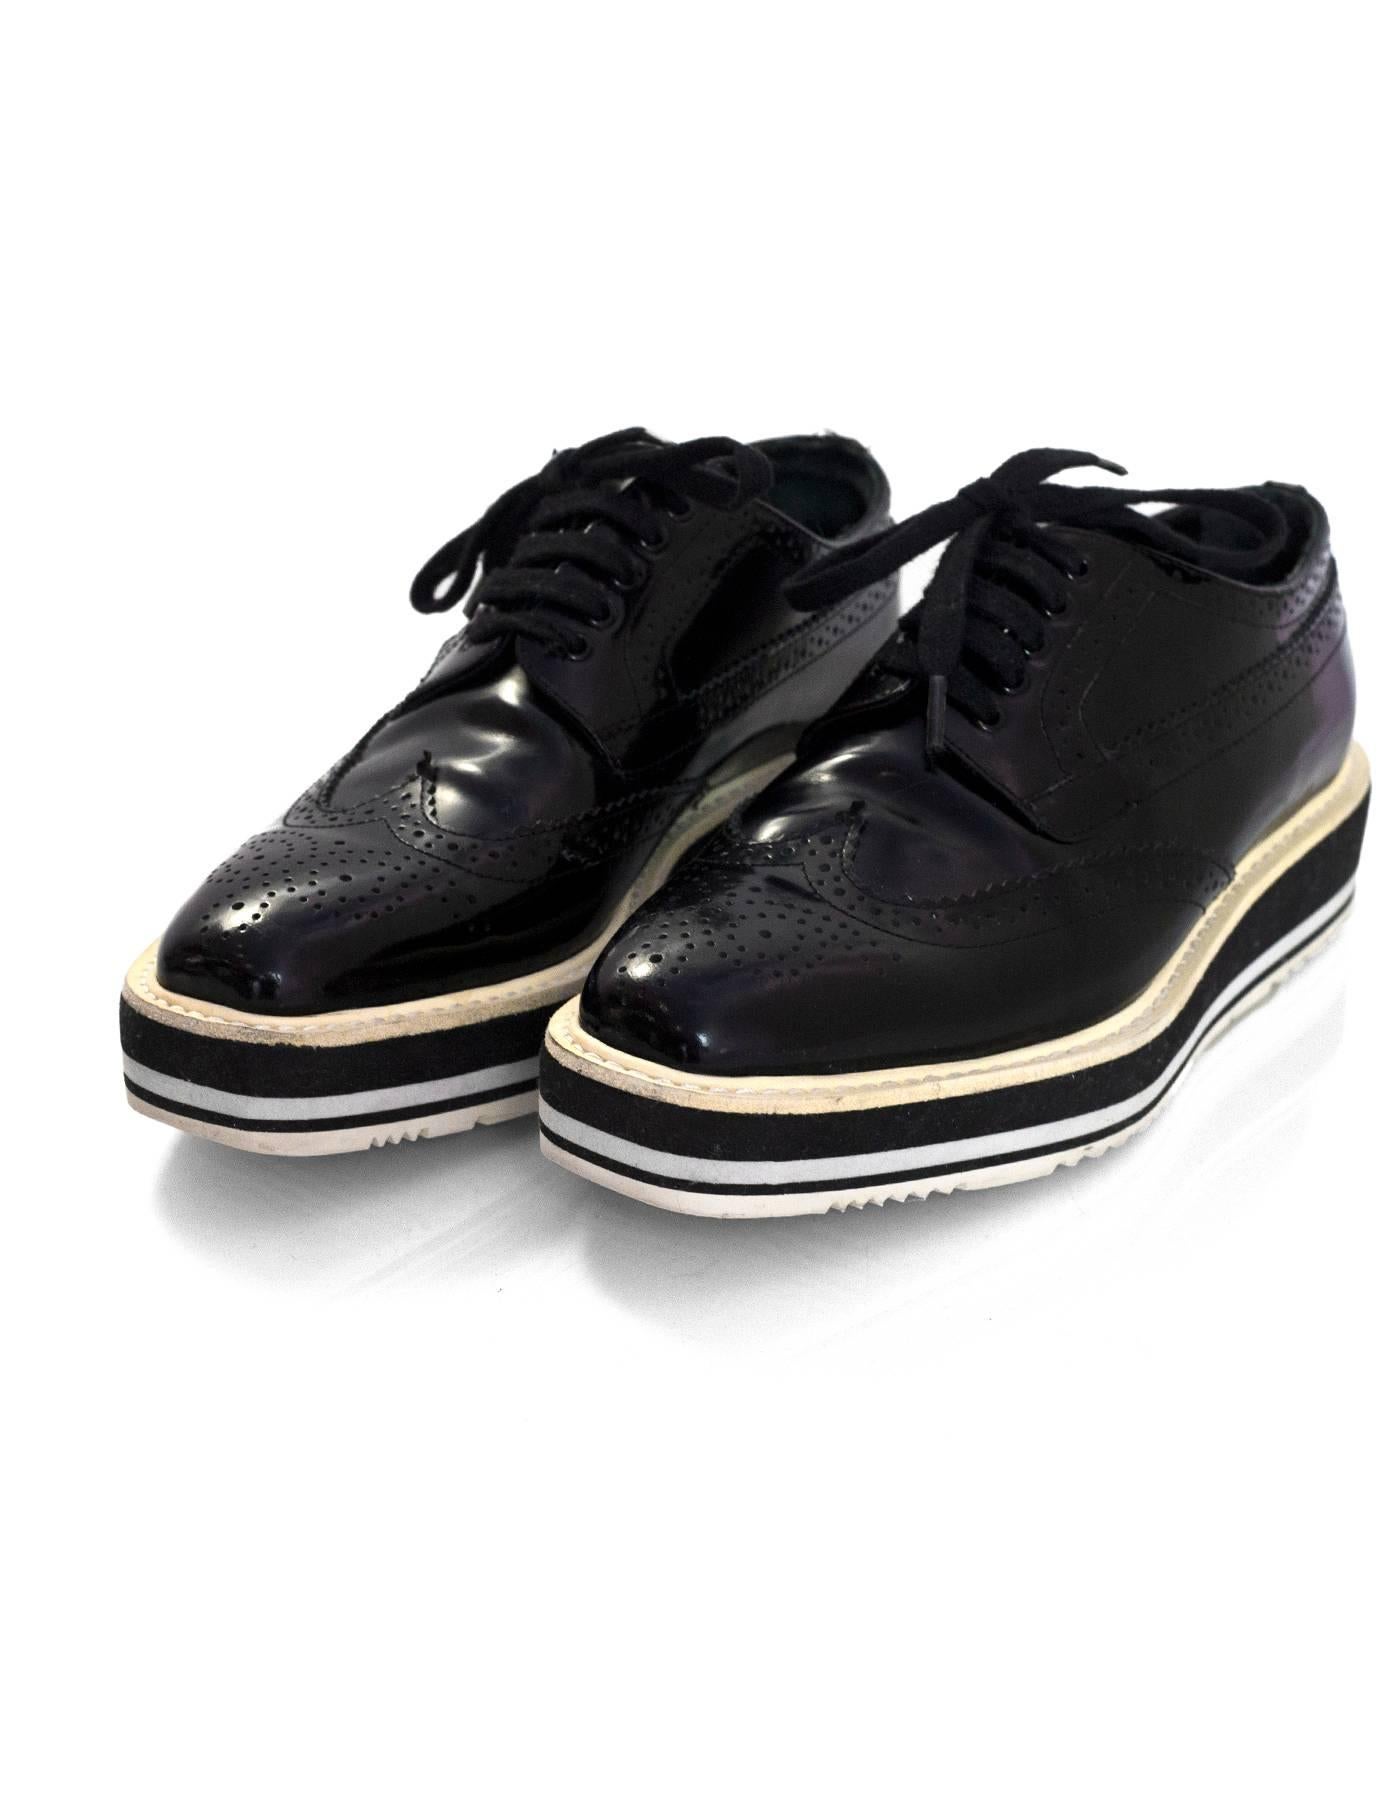 Prada Black Glazed Leather Brogues Platform Oxford Sz 38

Made In: Italy
Color: Black, white
Materials: Glazed leather, rubber
Closure/Opening: Lace tie closure
Sole Stamp: Prada 38
Overall Condition: Very good pre-owned condition with the exception